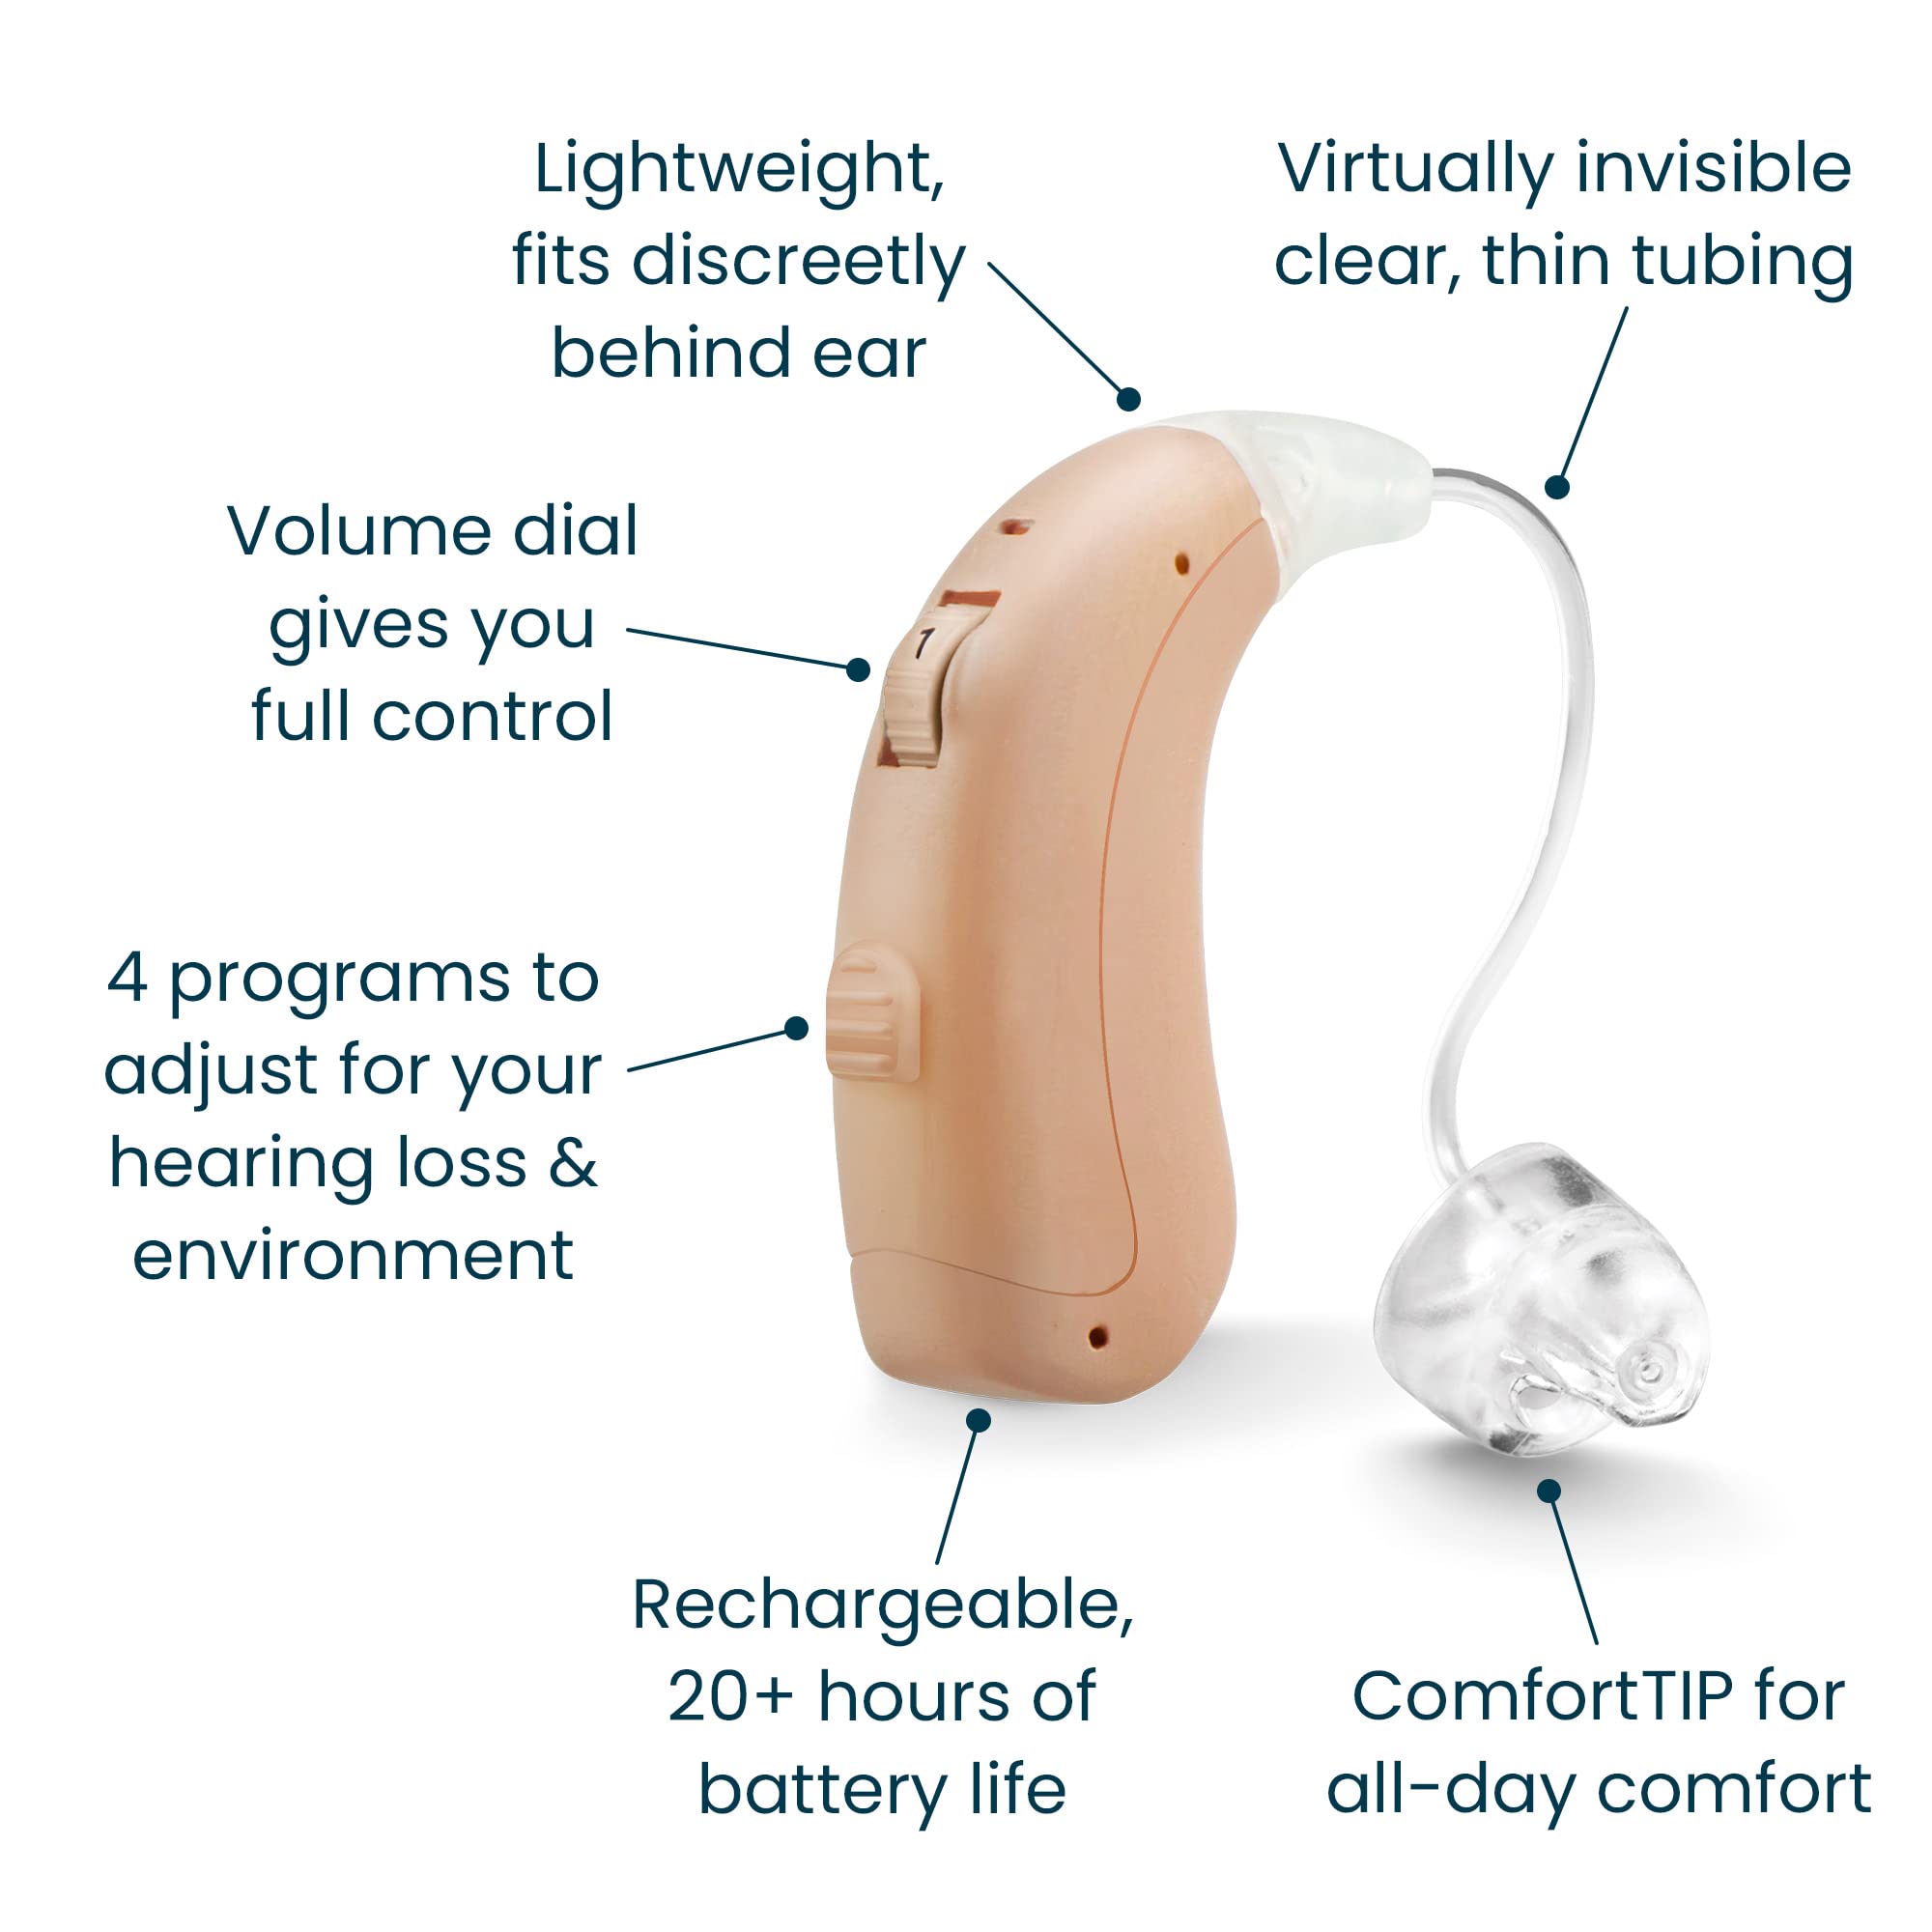 MDHearingAid VOLT OTC Hearing Aids for Seniors, Doctor-Designed Rechargeable, 2 Directional Microphones, 4 Audio Settings, Fits with Glasses, Deluxe Charger Included …